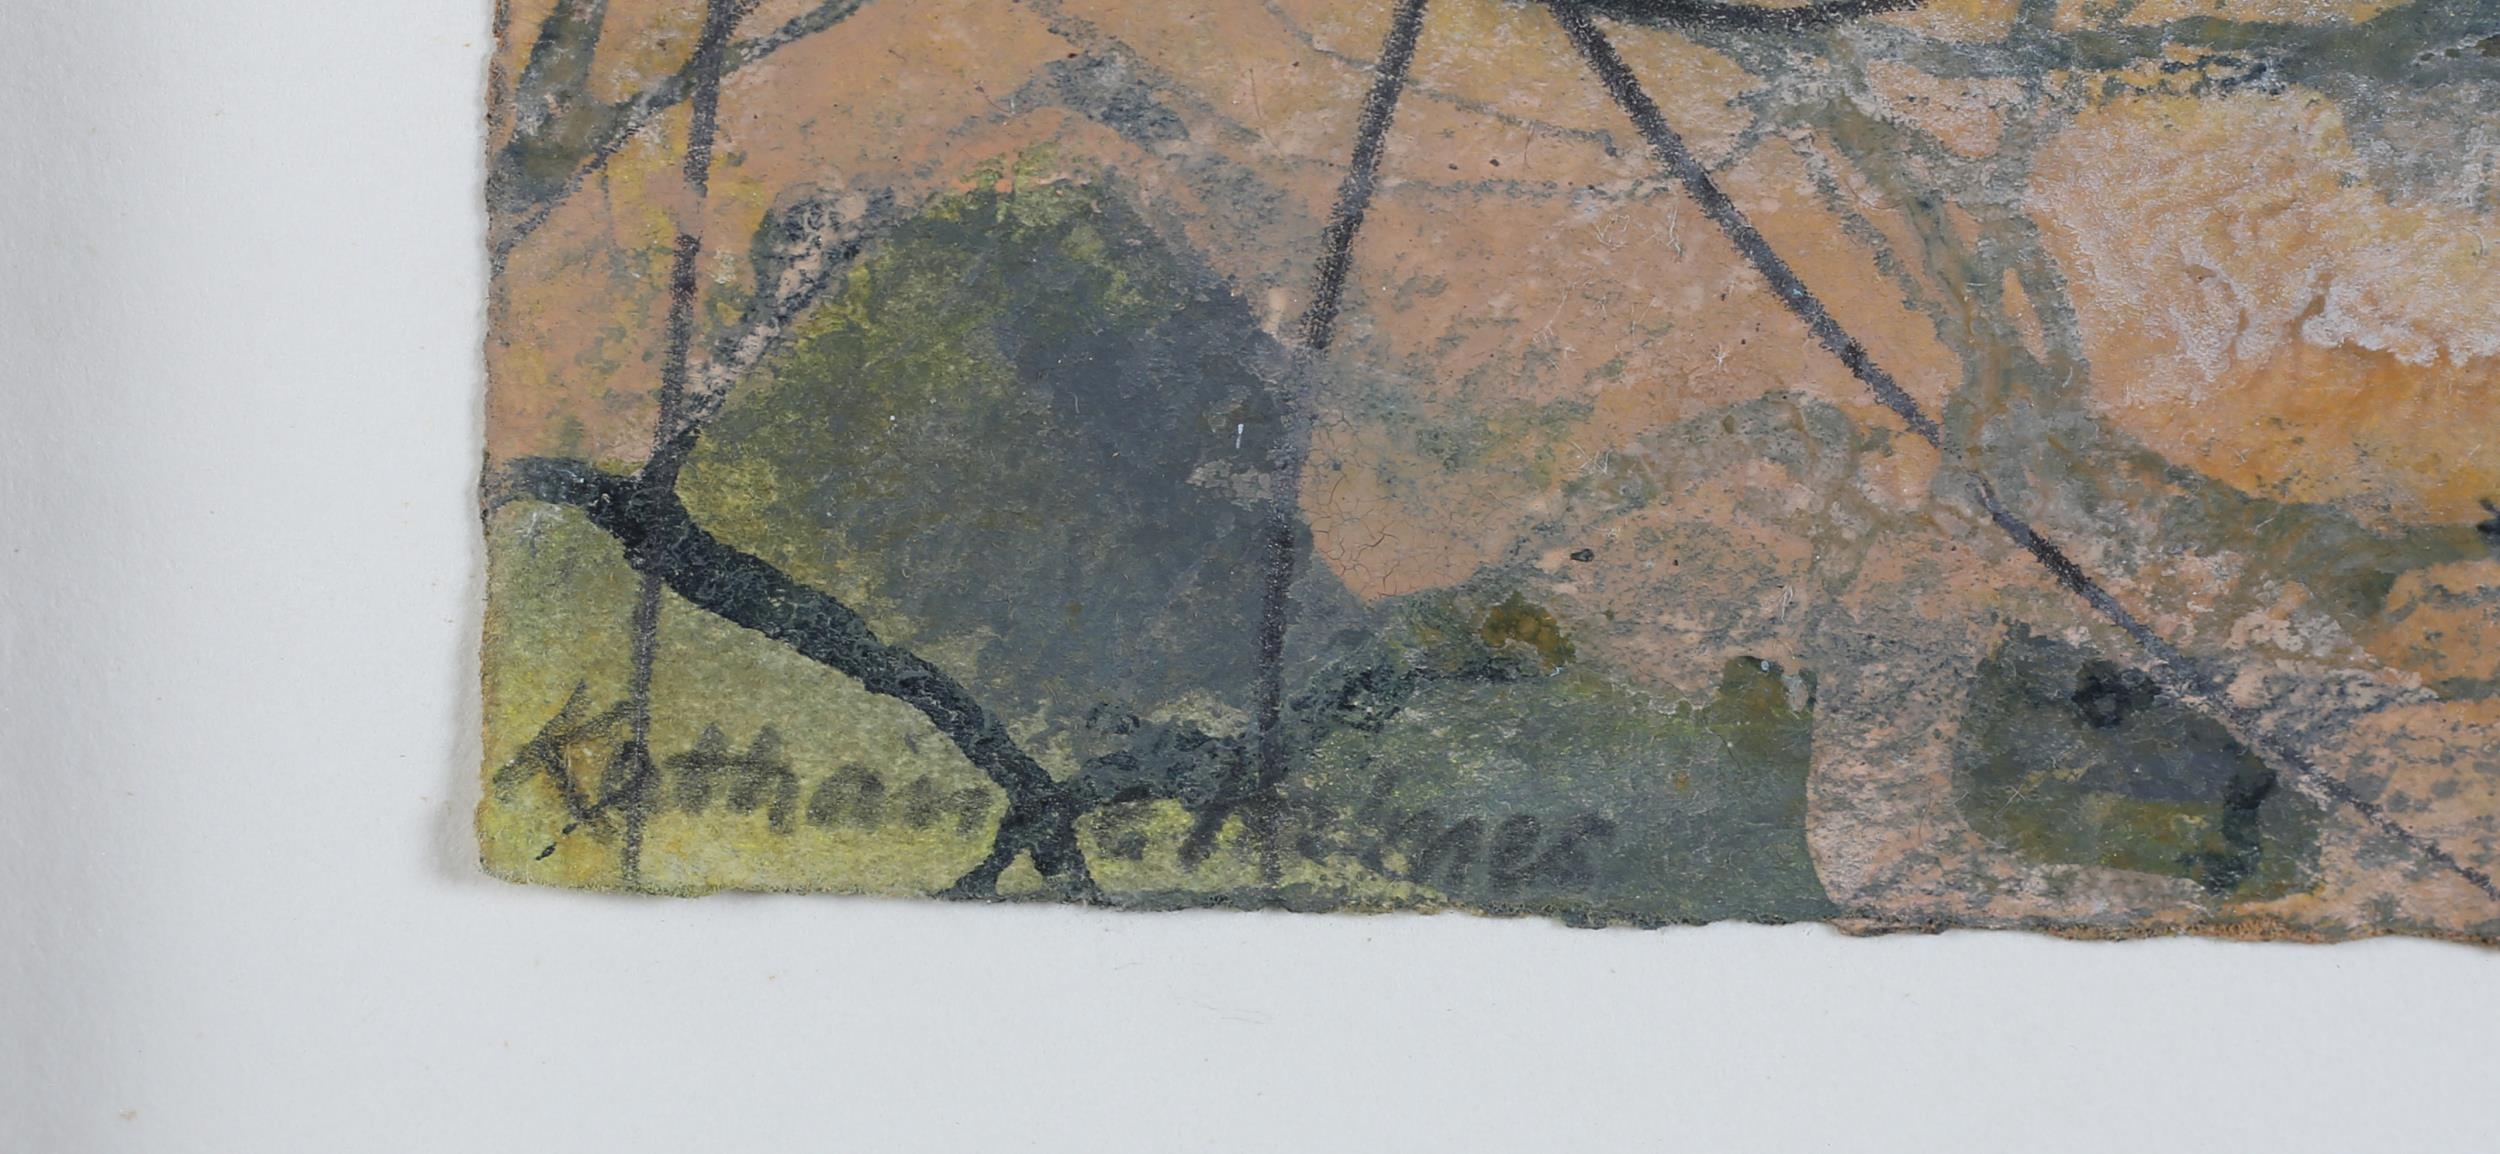 ARR Katherine Holmes (b 1962), Walls and a Few Ash Trees in the Mist, watercolour, ink and pastel on - Image 4 of 5